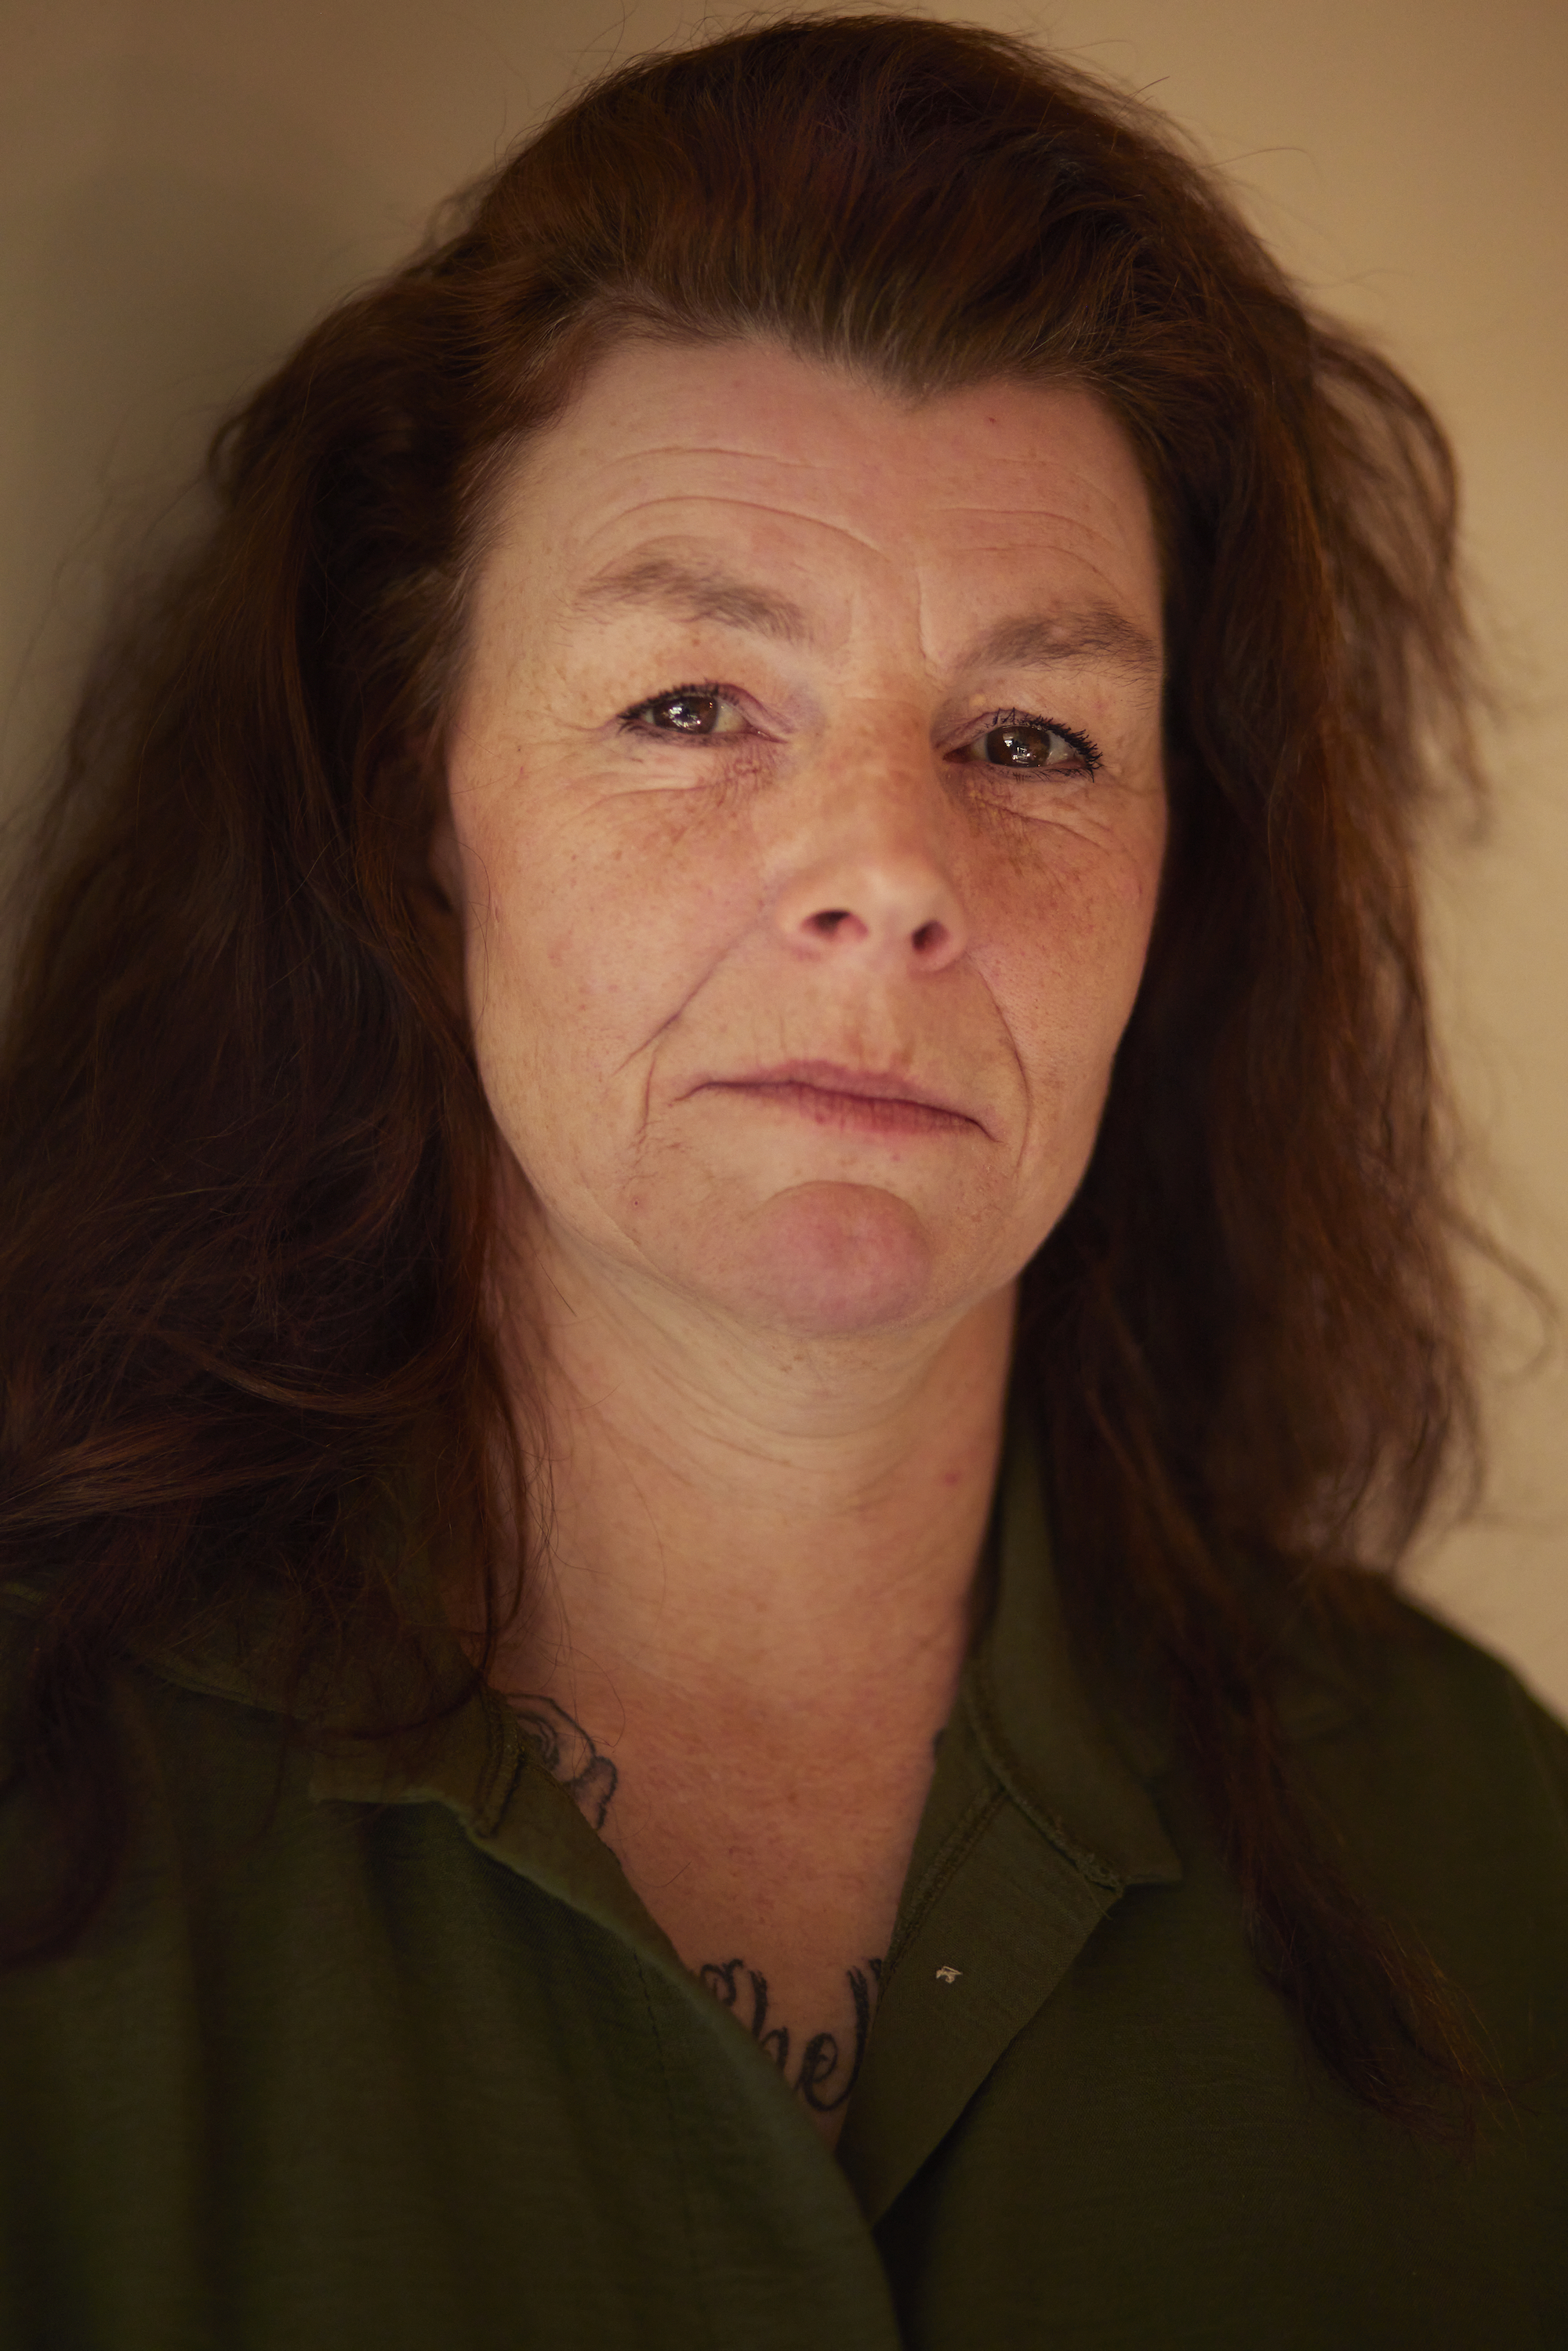 portrait of a woman with long, brown hair wearing a kaki shirt. She has a tattoo on her chest